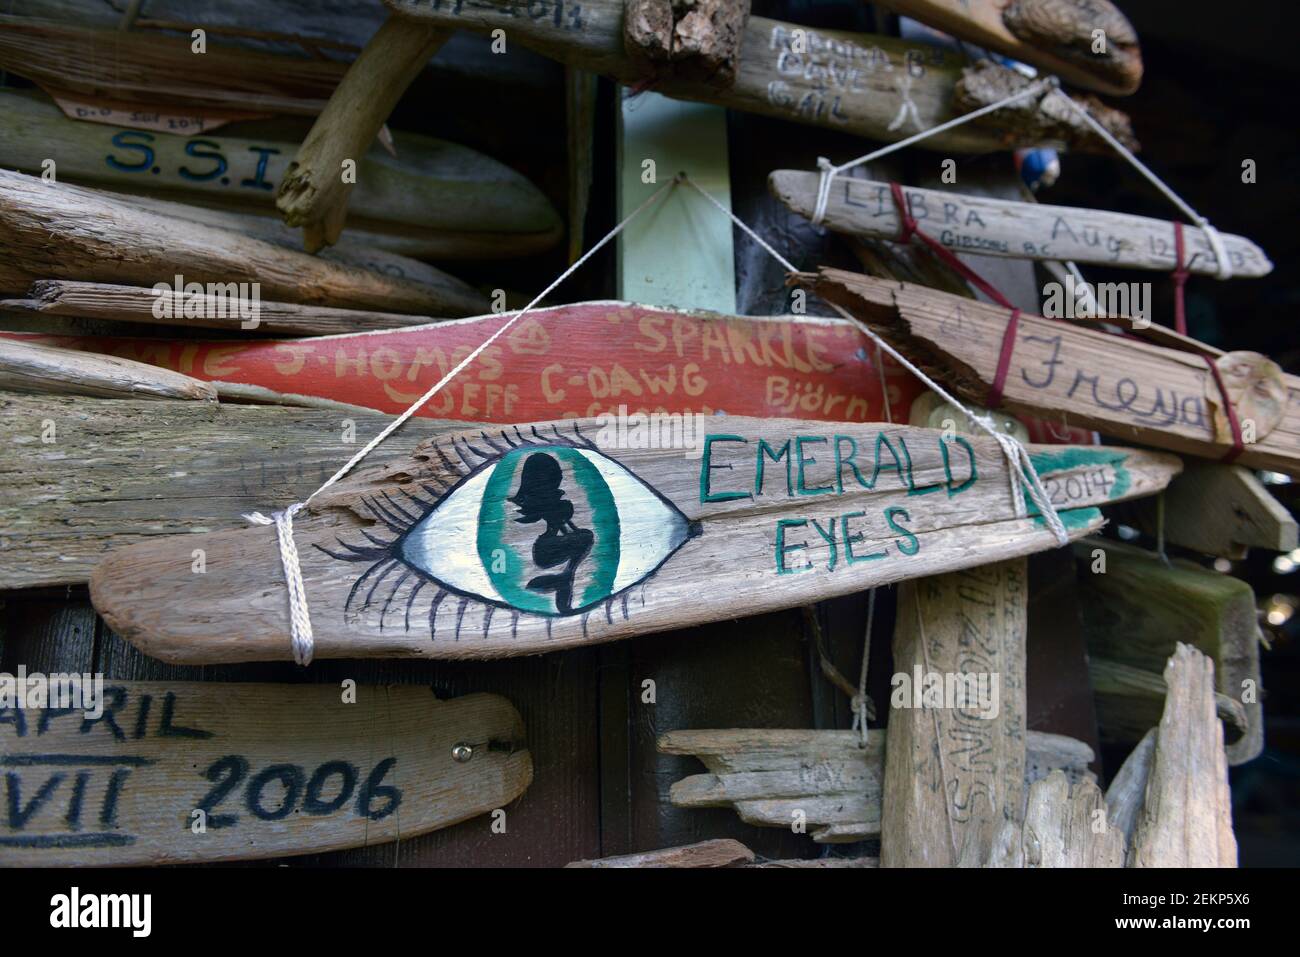 Driftwood signe pour Emerald Eyes 2014, Wallace Island, Gulf Islands, Colombie-Britannique, Canada Banque D'Images